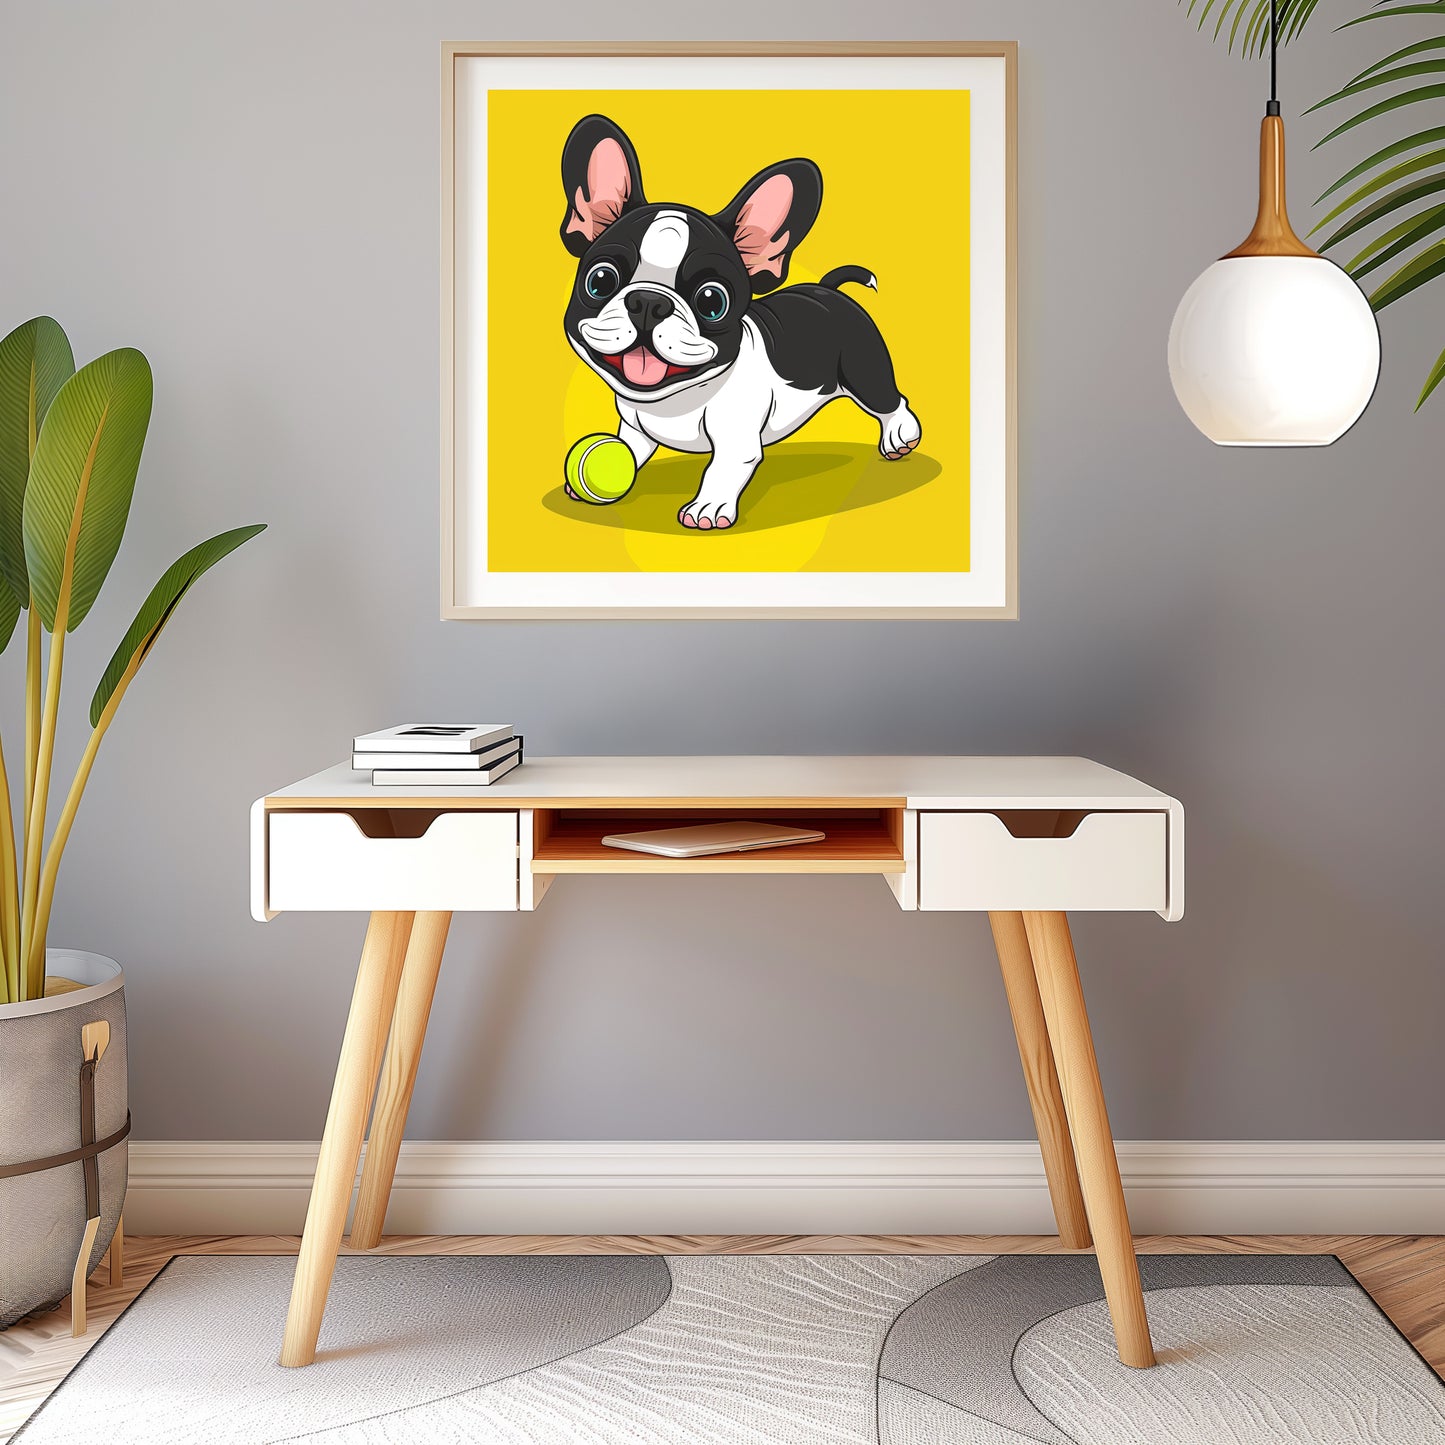 Playful French Bulldog Puppy with Ball on Yellow Background